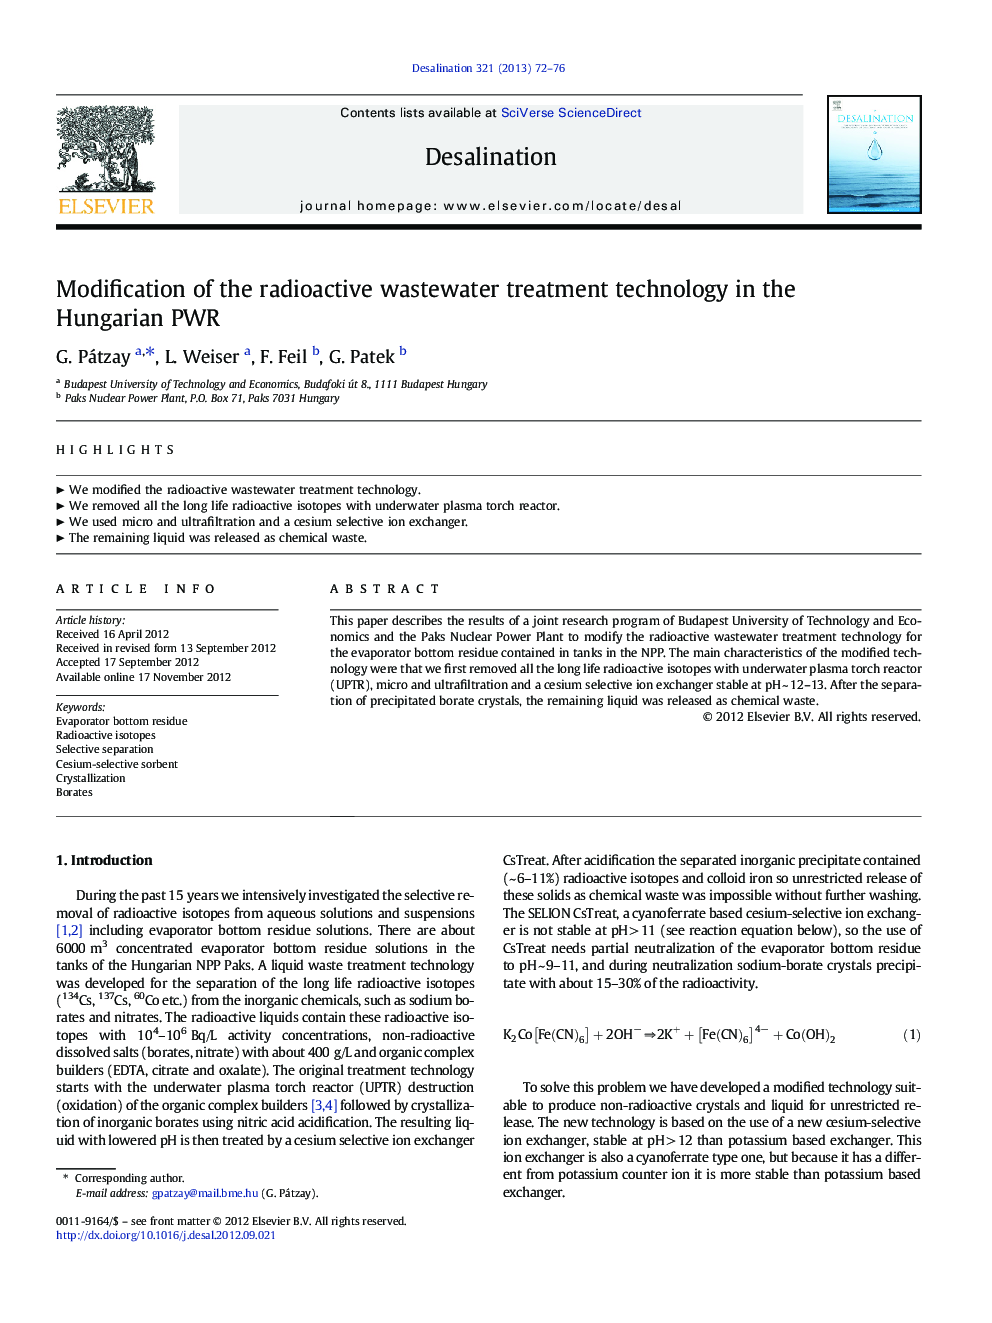 Modification of the radioactive wastewater treatment technology in the Hungarian PWR